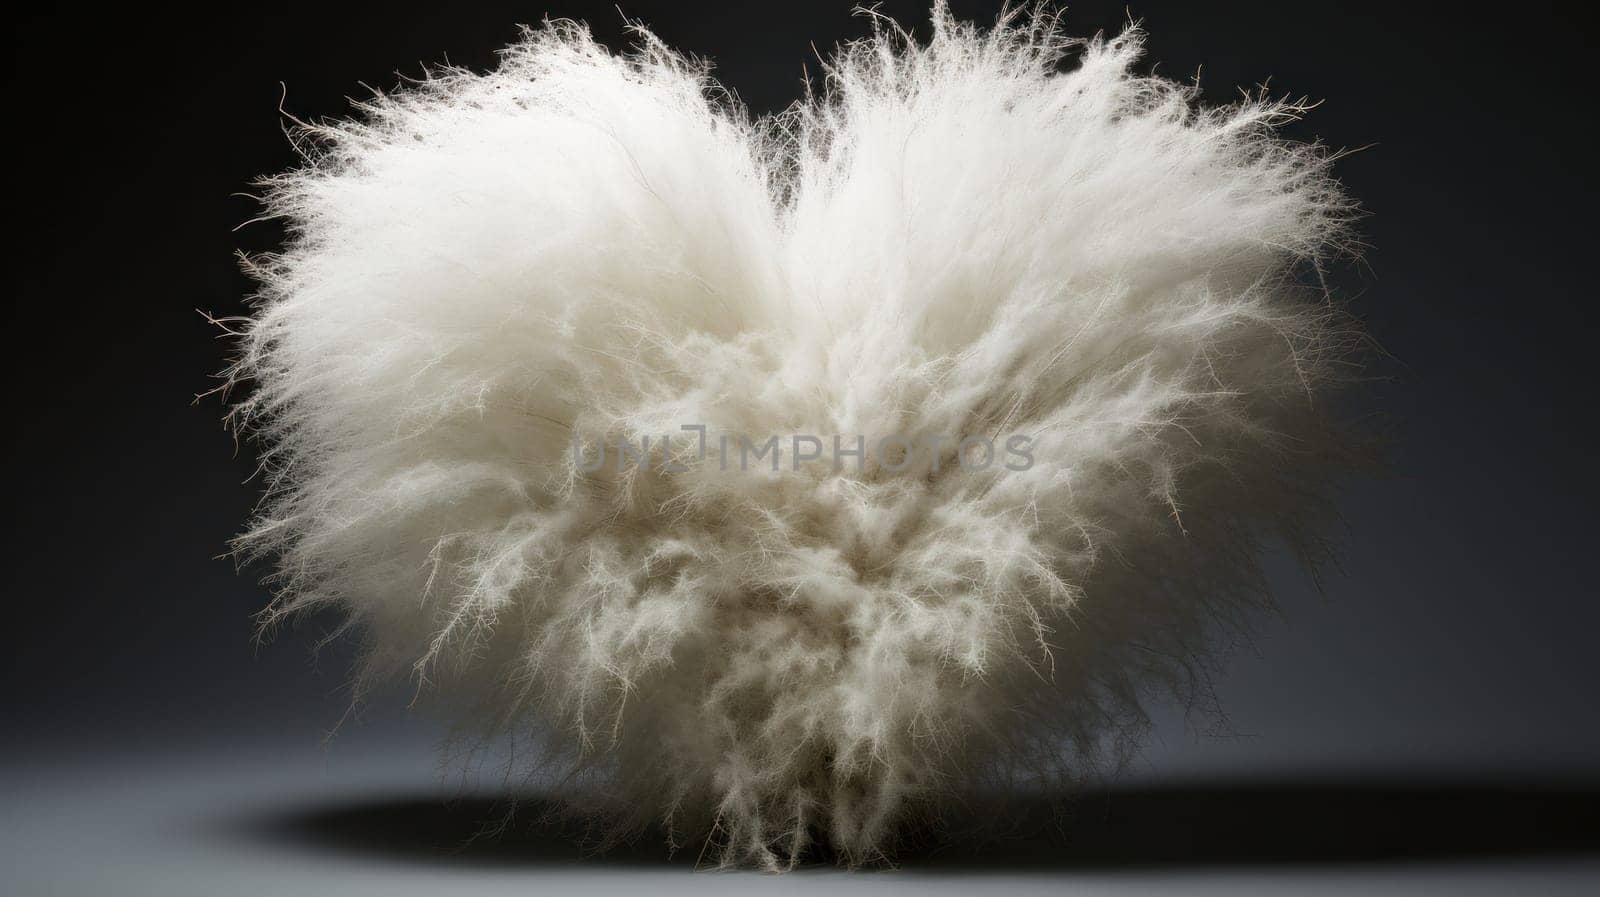 A white fluffy object on a gray background with some light coming through